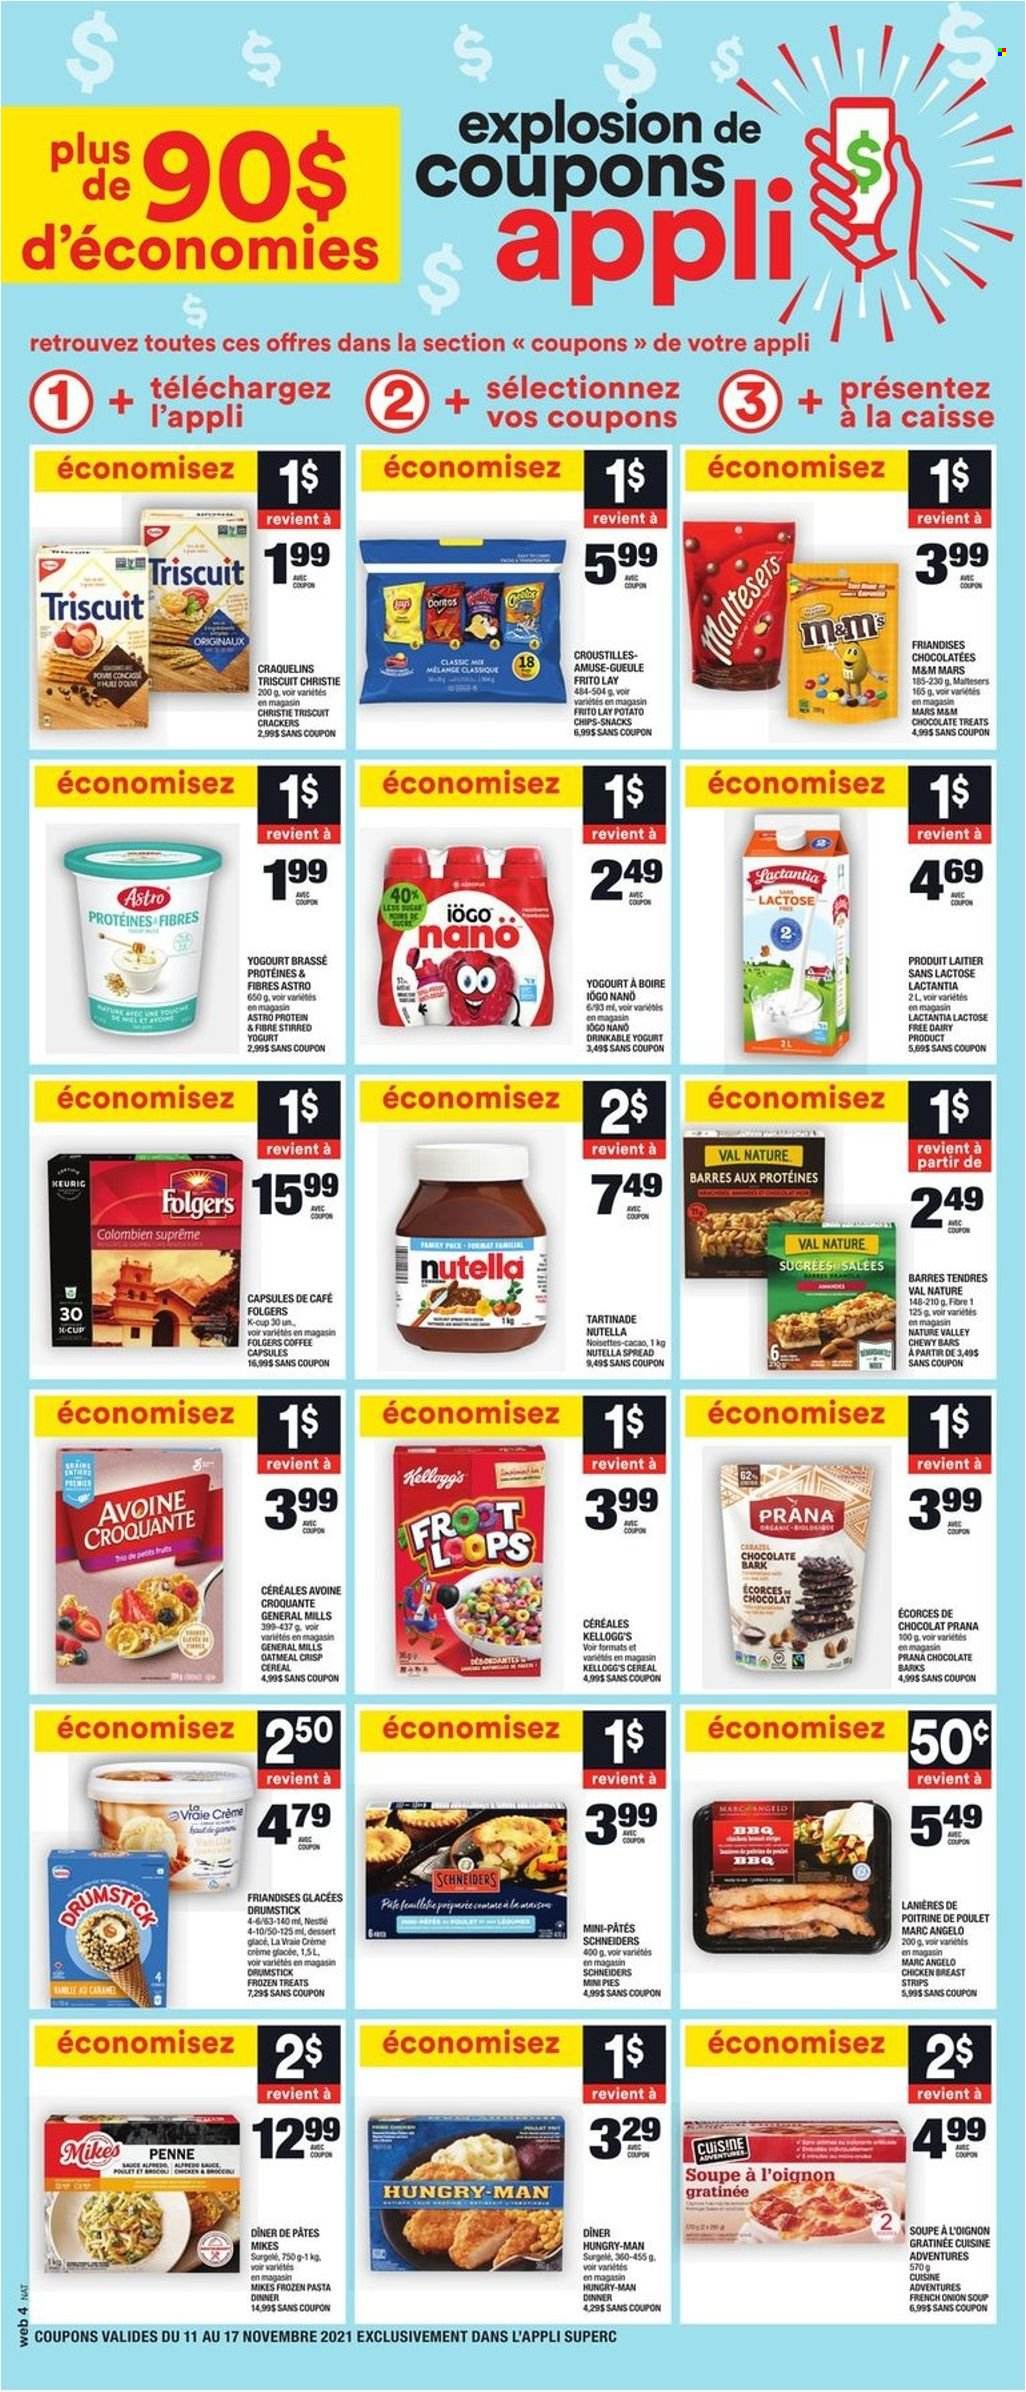 thumbnail - Super C Flyer - November 11, 2021 - November 17, 2021 - Sales products - onion soup, soup, yoghurt, strips, chocolate, snack, Mars, crackers, Kellogg's, Maltesers, potato chips, oatmeal, cereals, Nature Valley, penne, coffee, Folgers, coffee capsules, K-Cups, Keurig, chicken, Nutella, M&M's. Page 2.